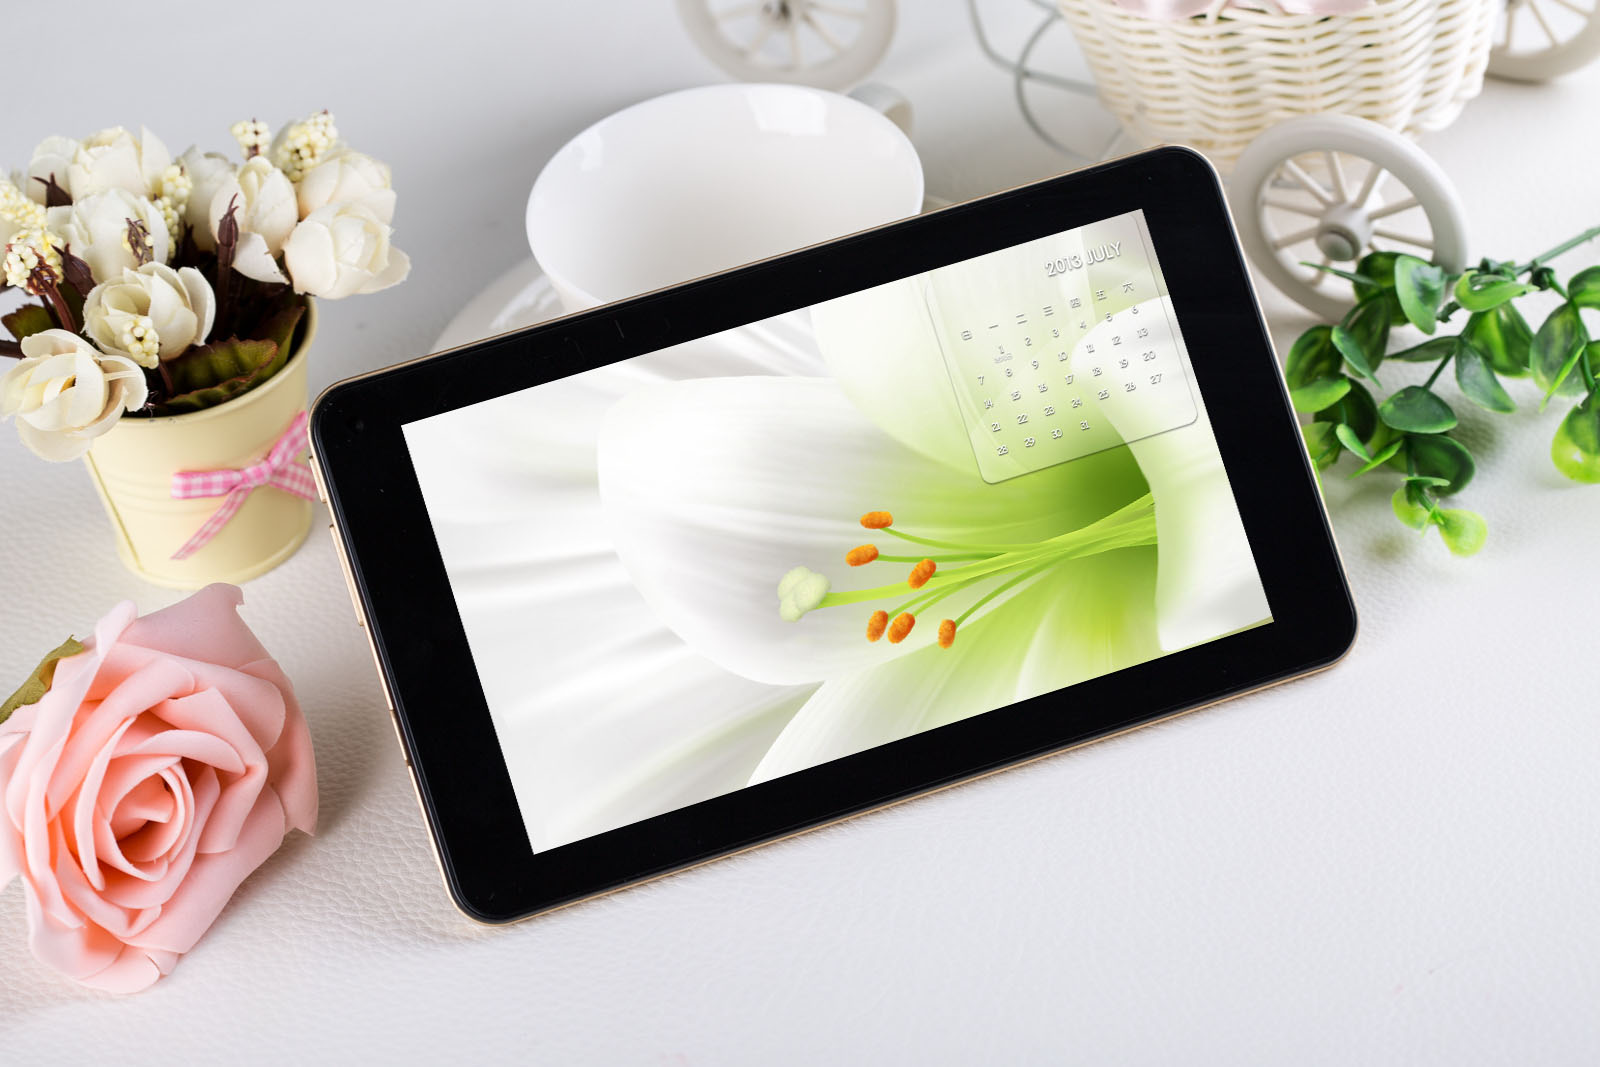 V7-7 Inch Android Dual Core Tablet PC with HDMI WiFi